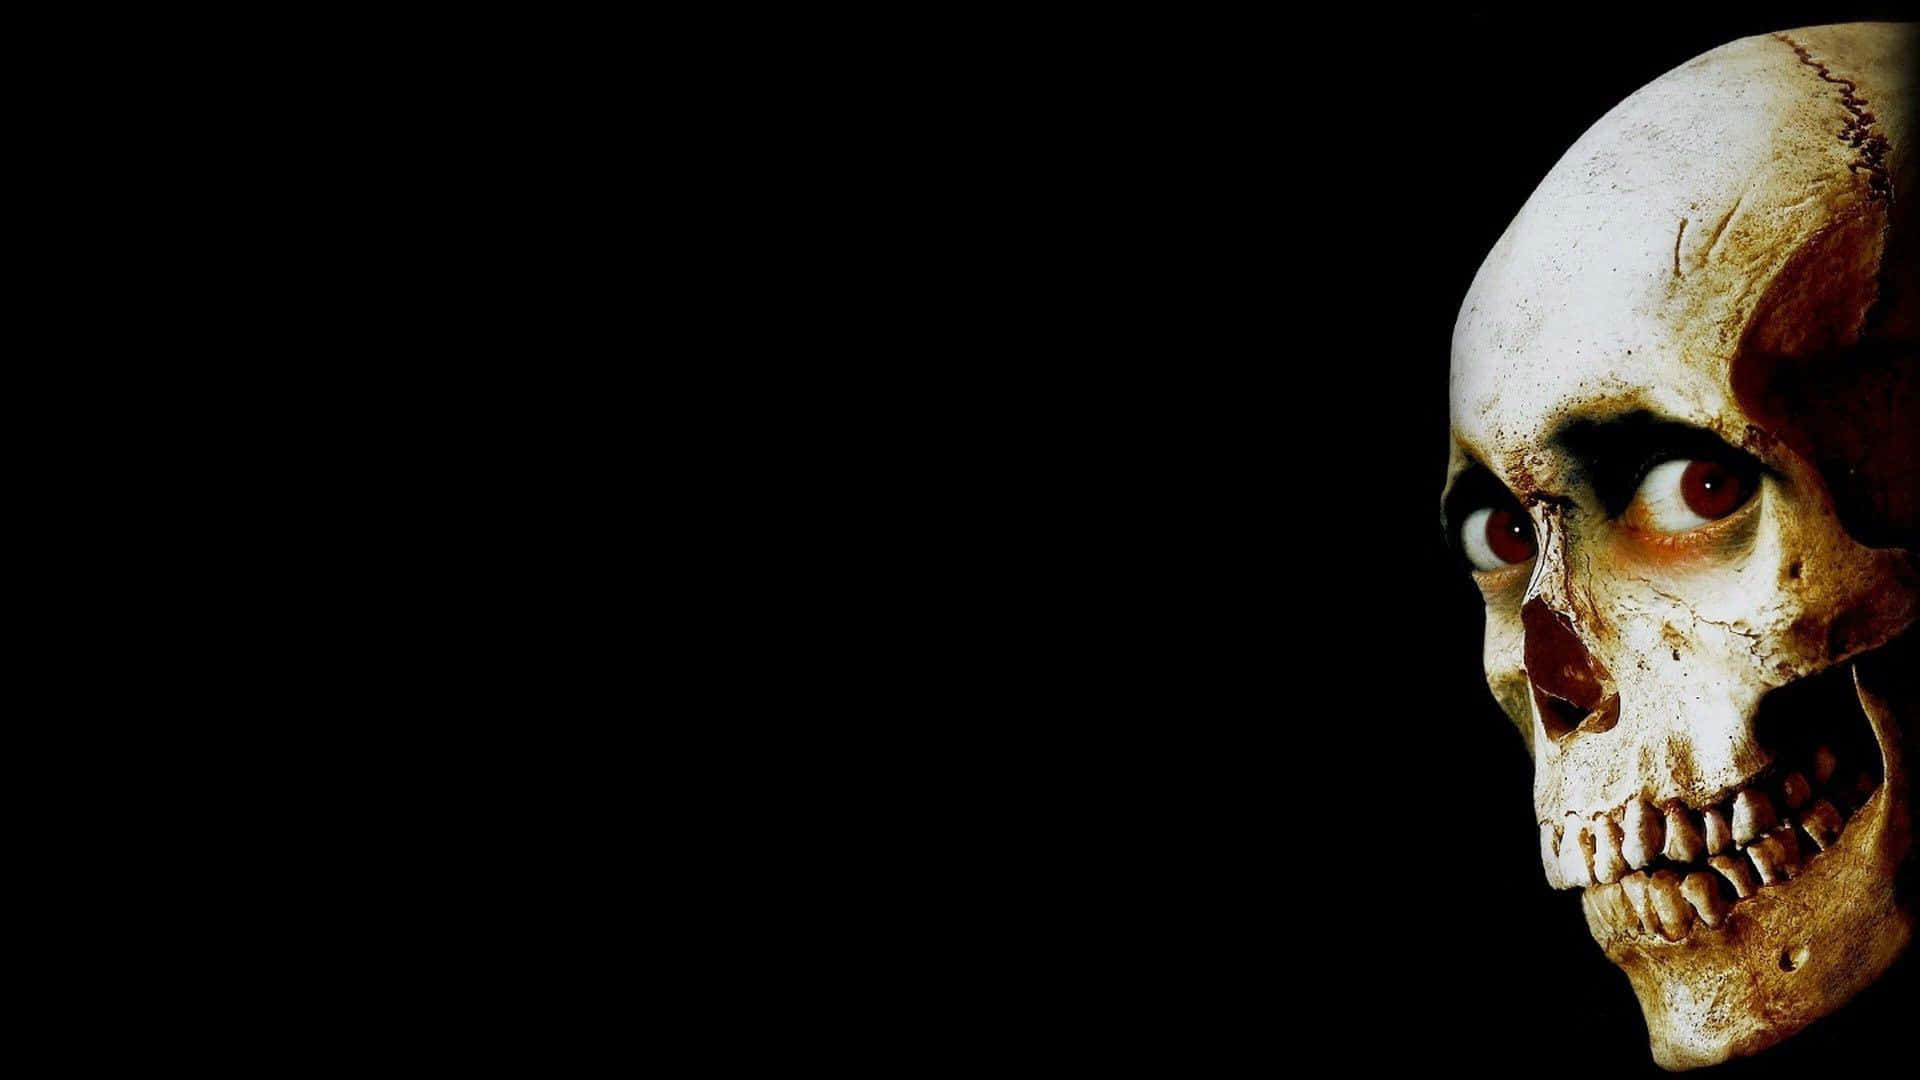 A Skull Is Shown On A Black Background Wallpaper